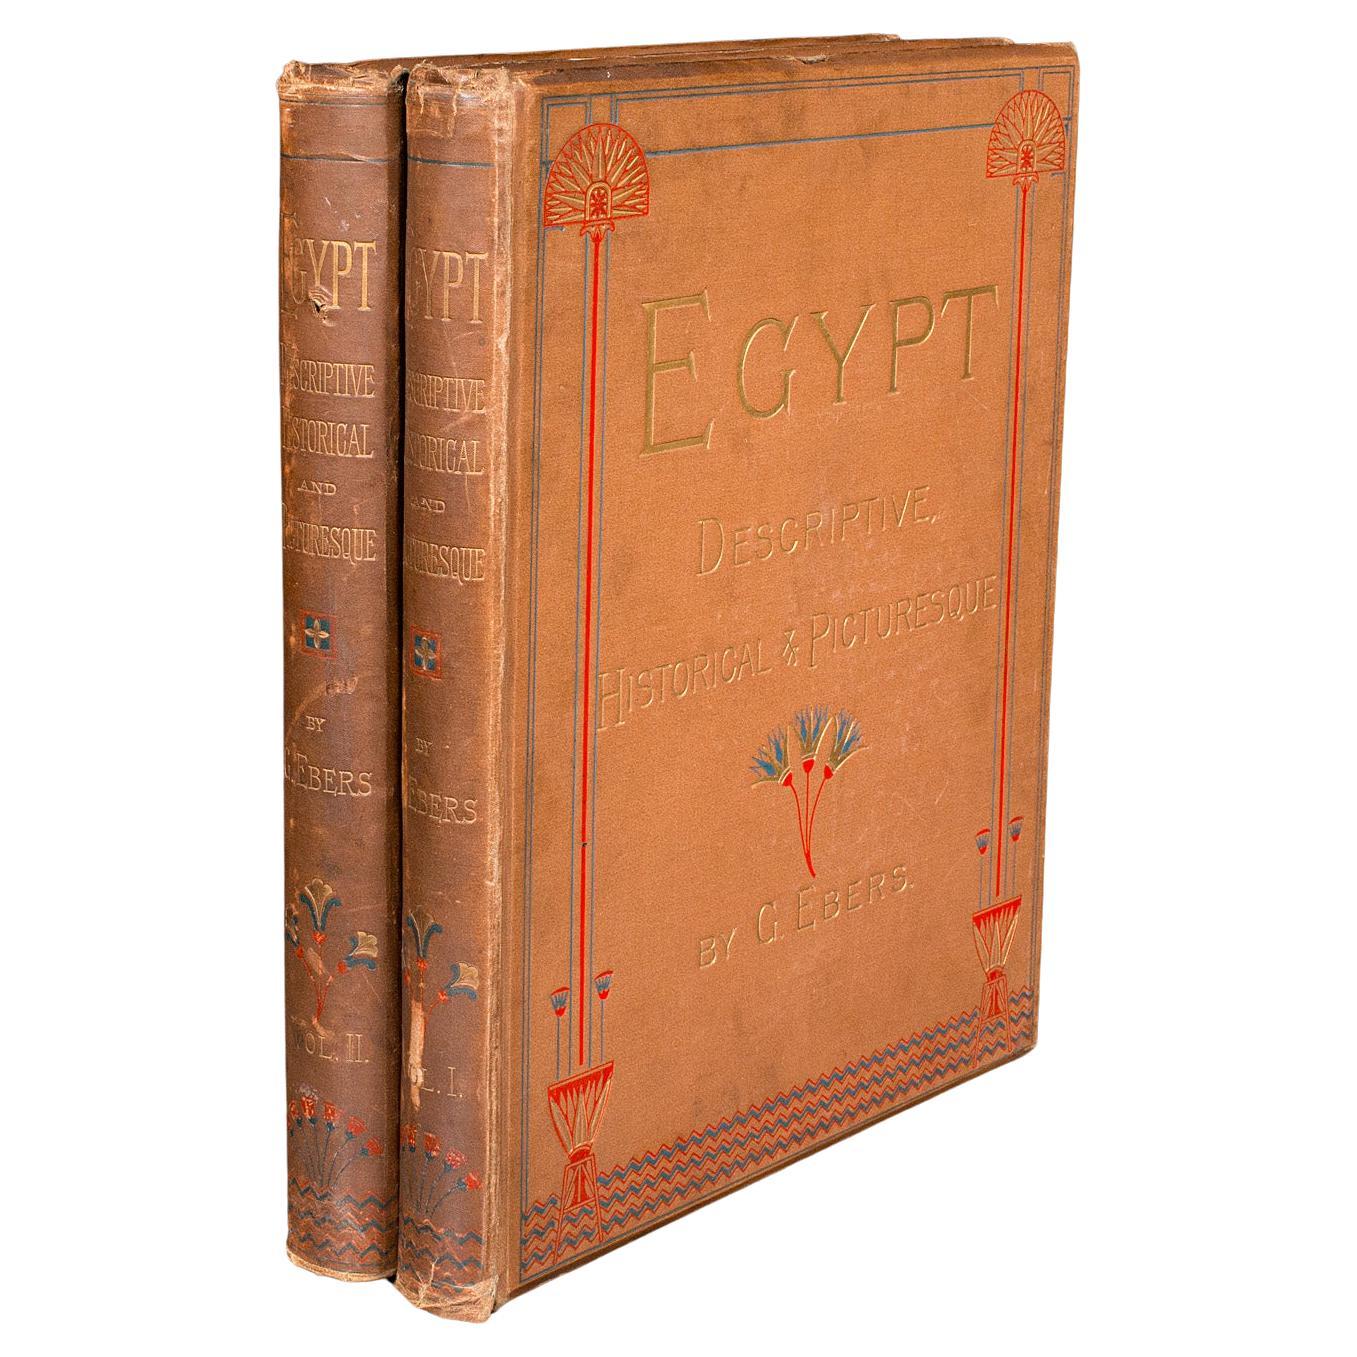 2 Large Vols Antique Reference Book, Egypt - Historical and Picturesque, English For Sale